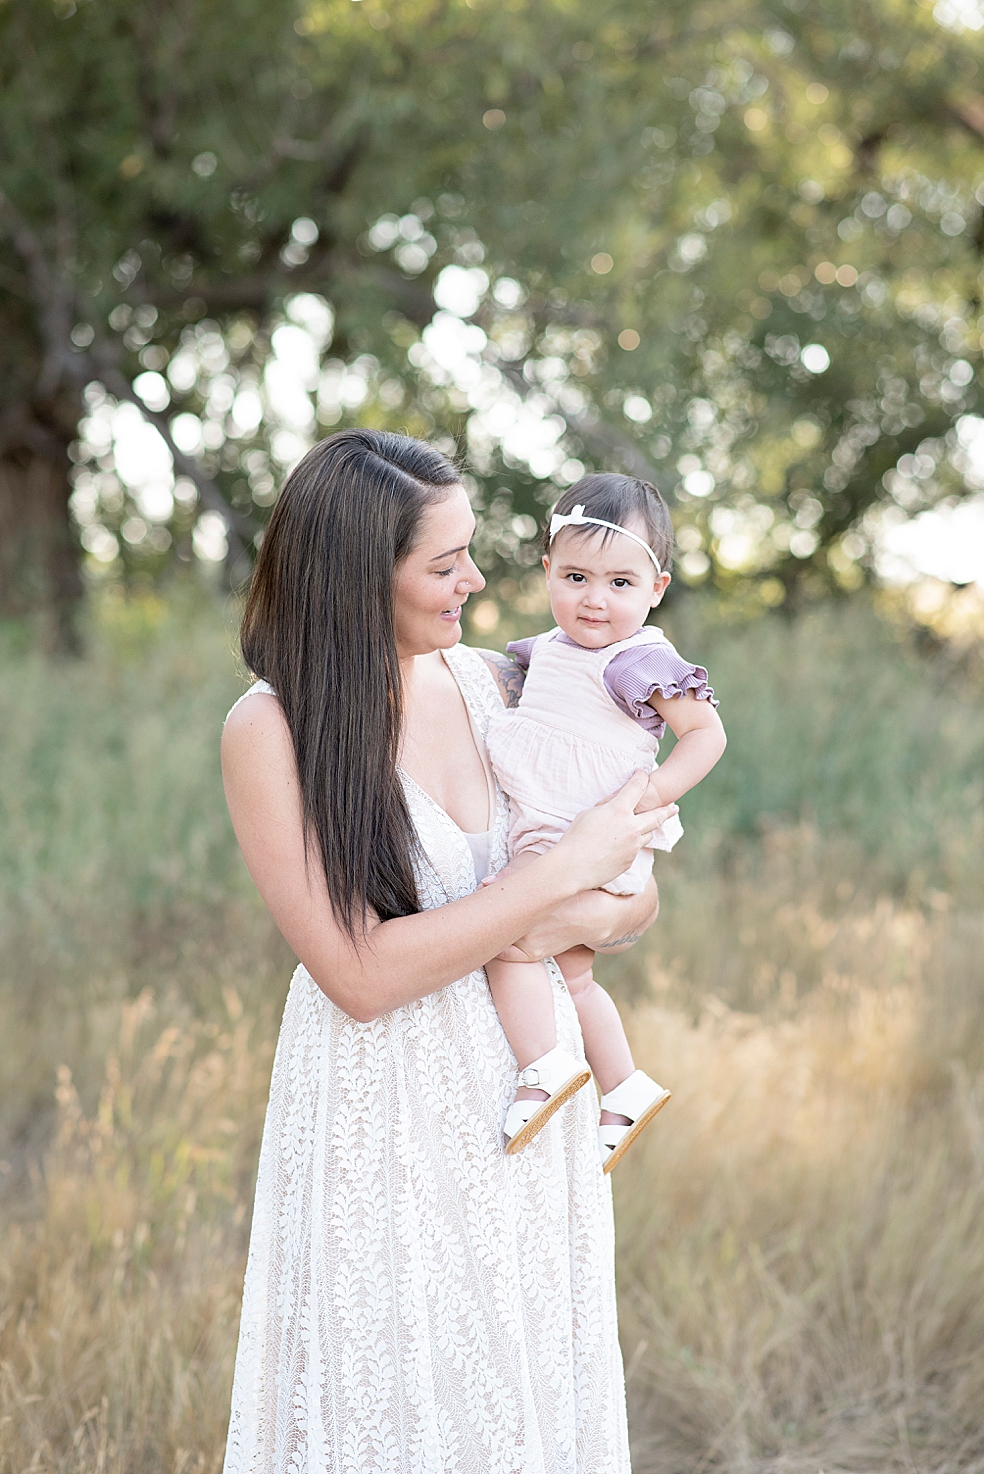 Mom in a textured white dress holding her little girl in a bow | Photo by Jessica Lee Photography